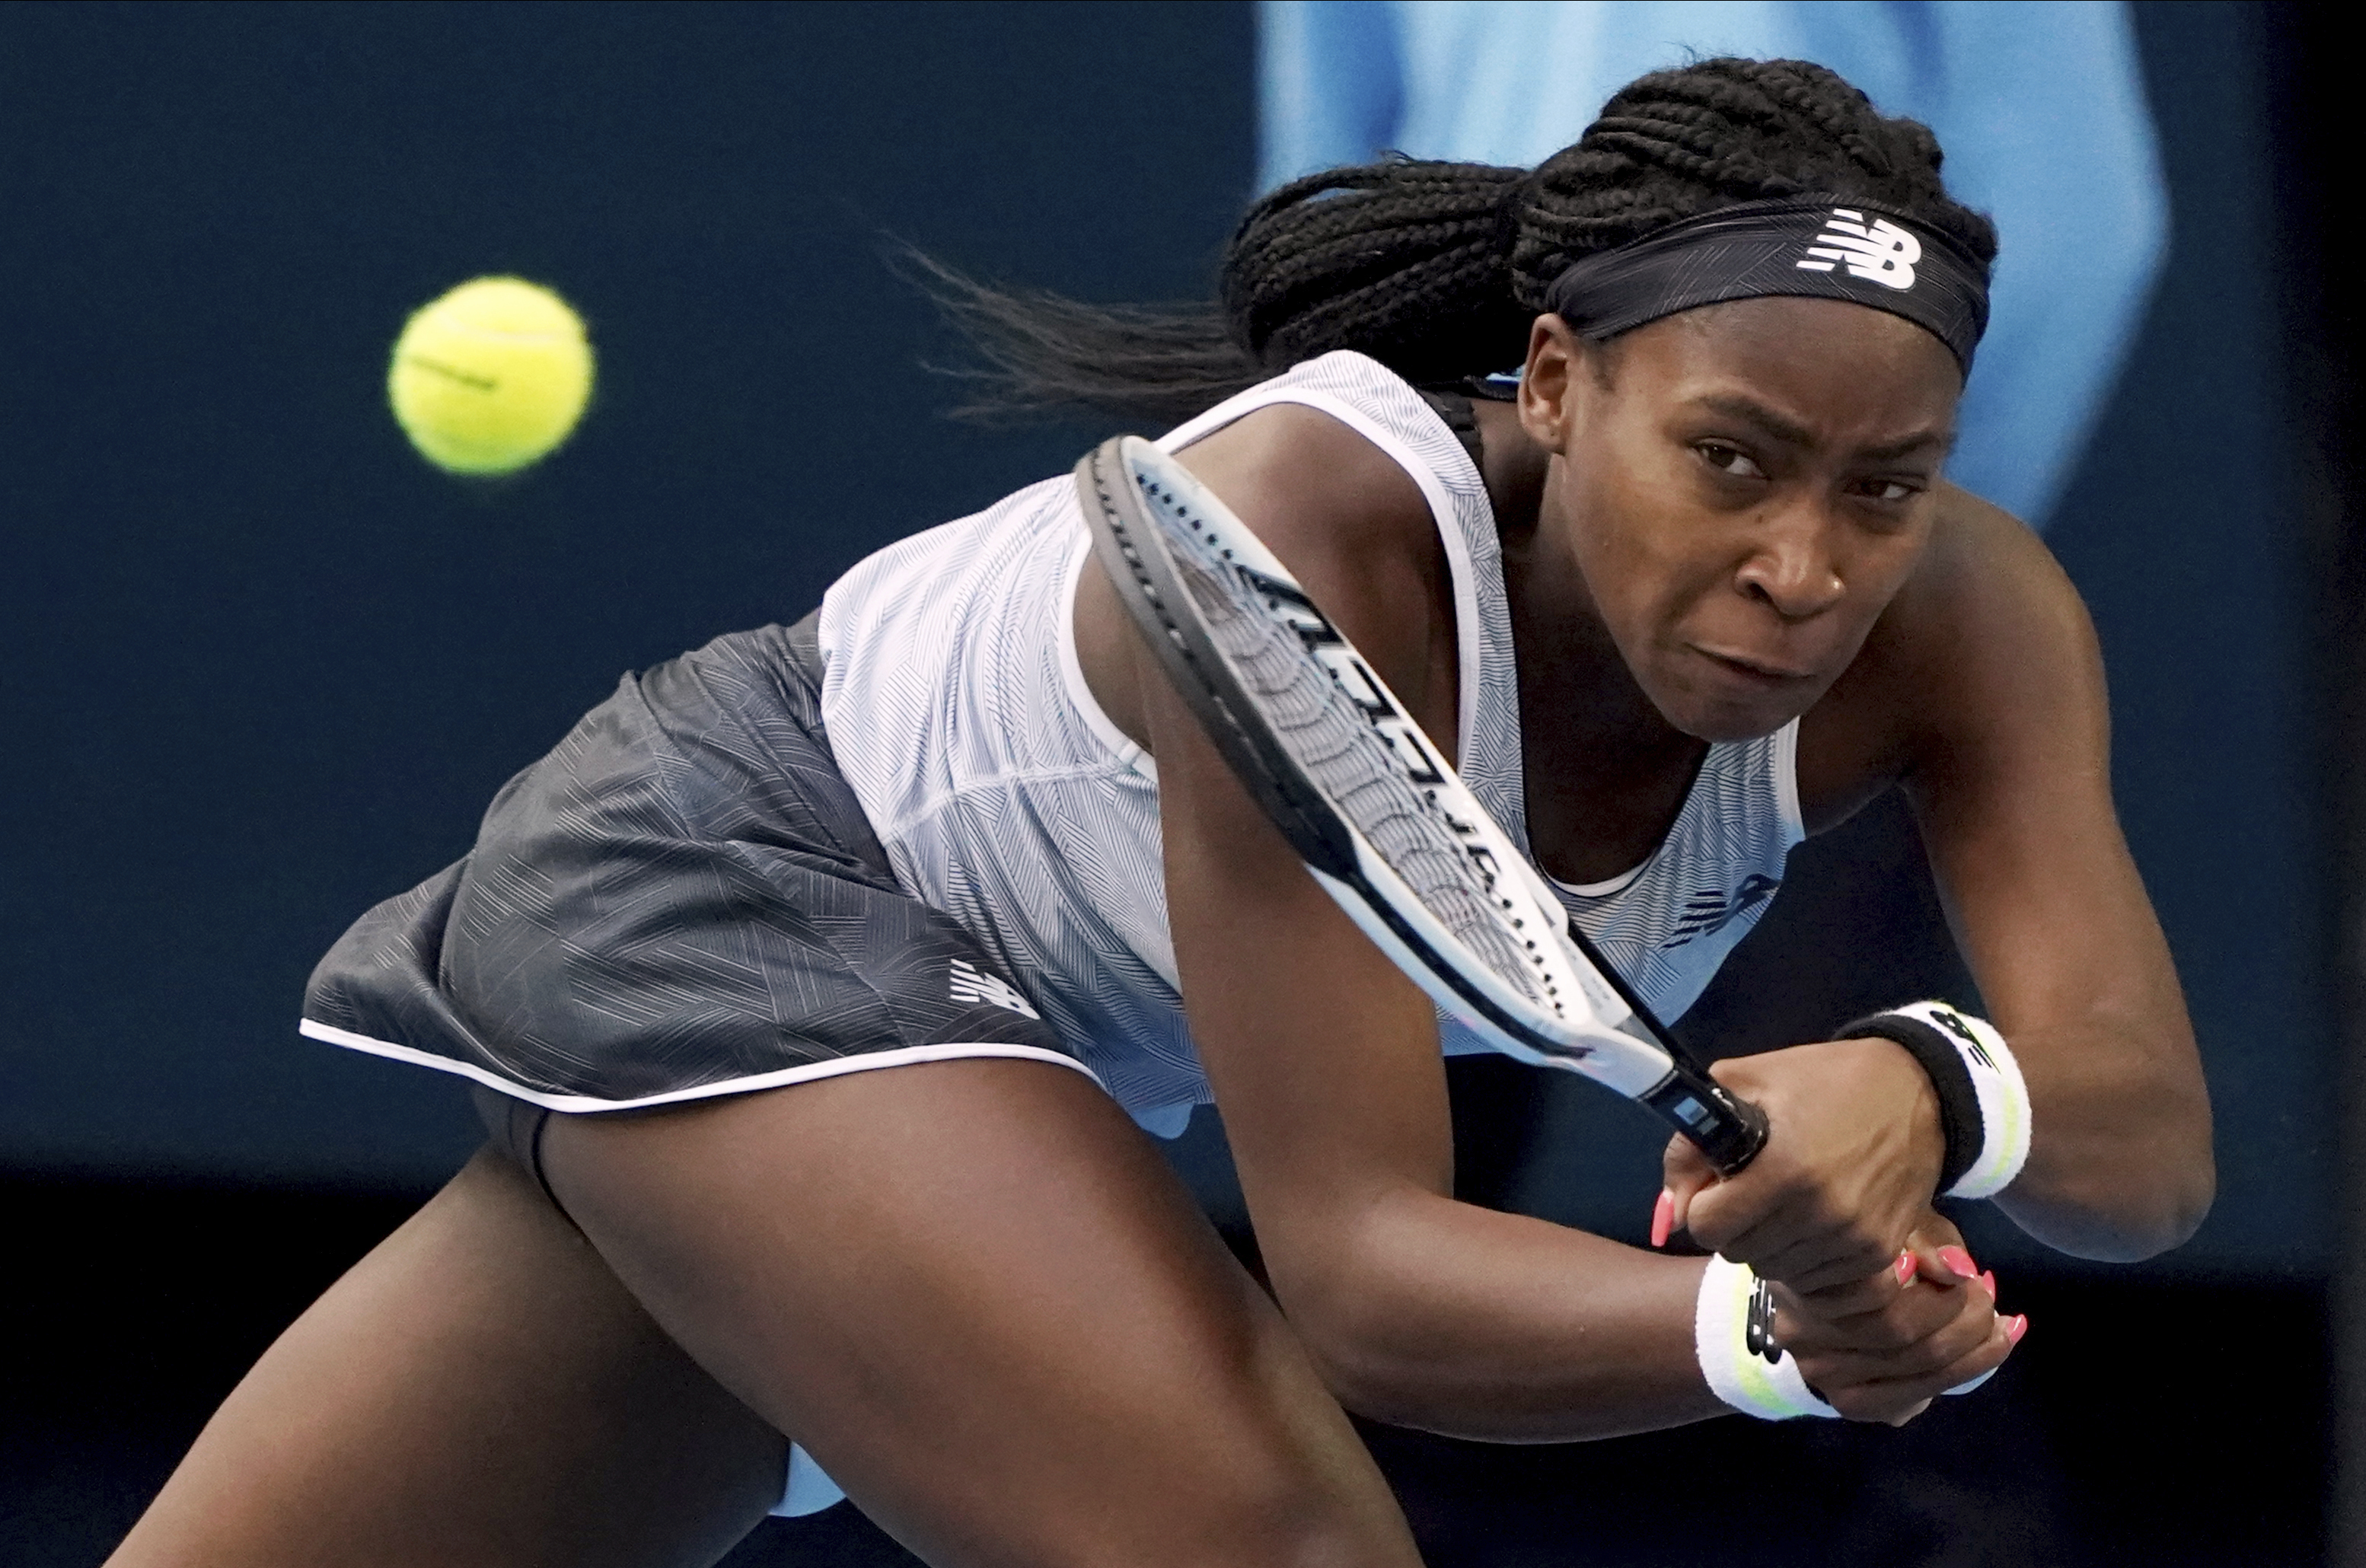 Australian Open free live stream (2/10/21) How to watch Rafael Nadal and Coco Gauff, time, channel